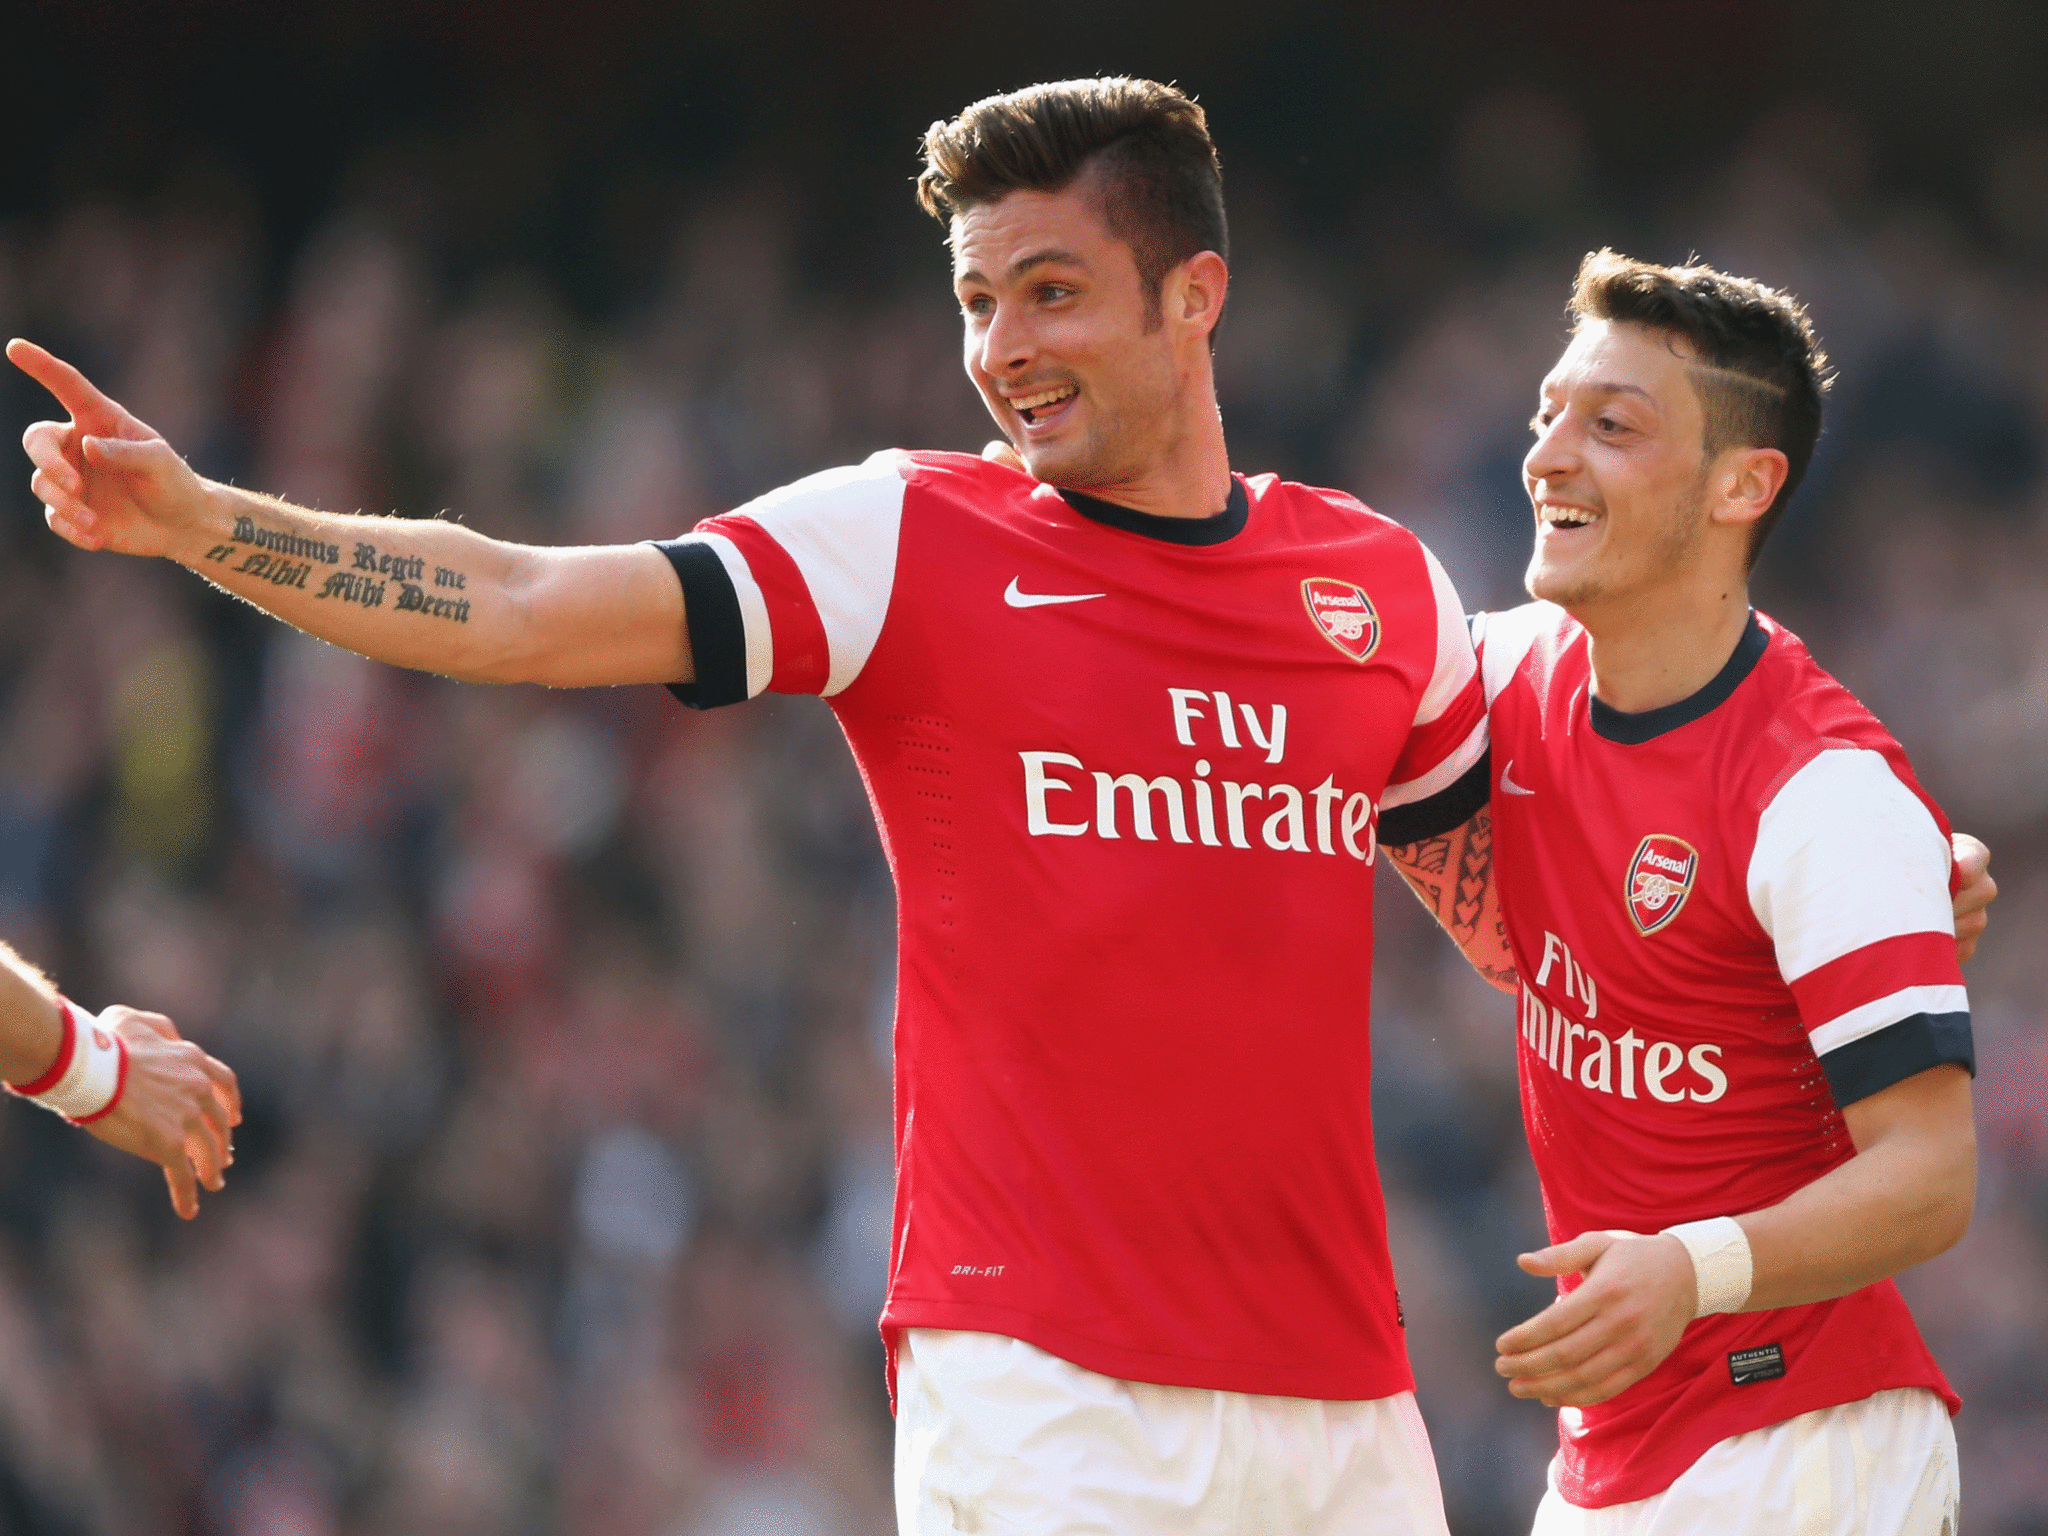 The recalled Giroud celebrates his second goal against Everton in yesterday's FA Cup match